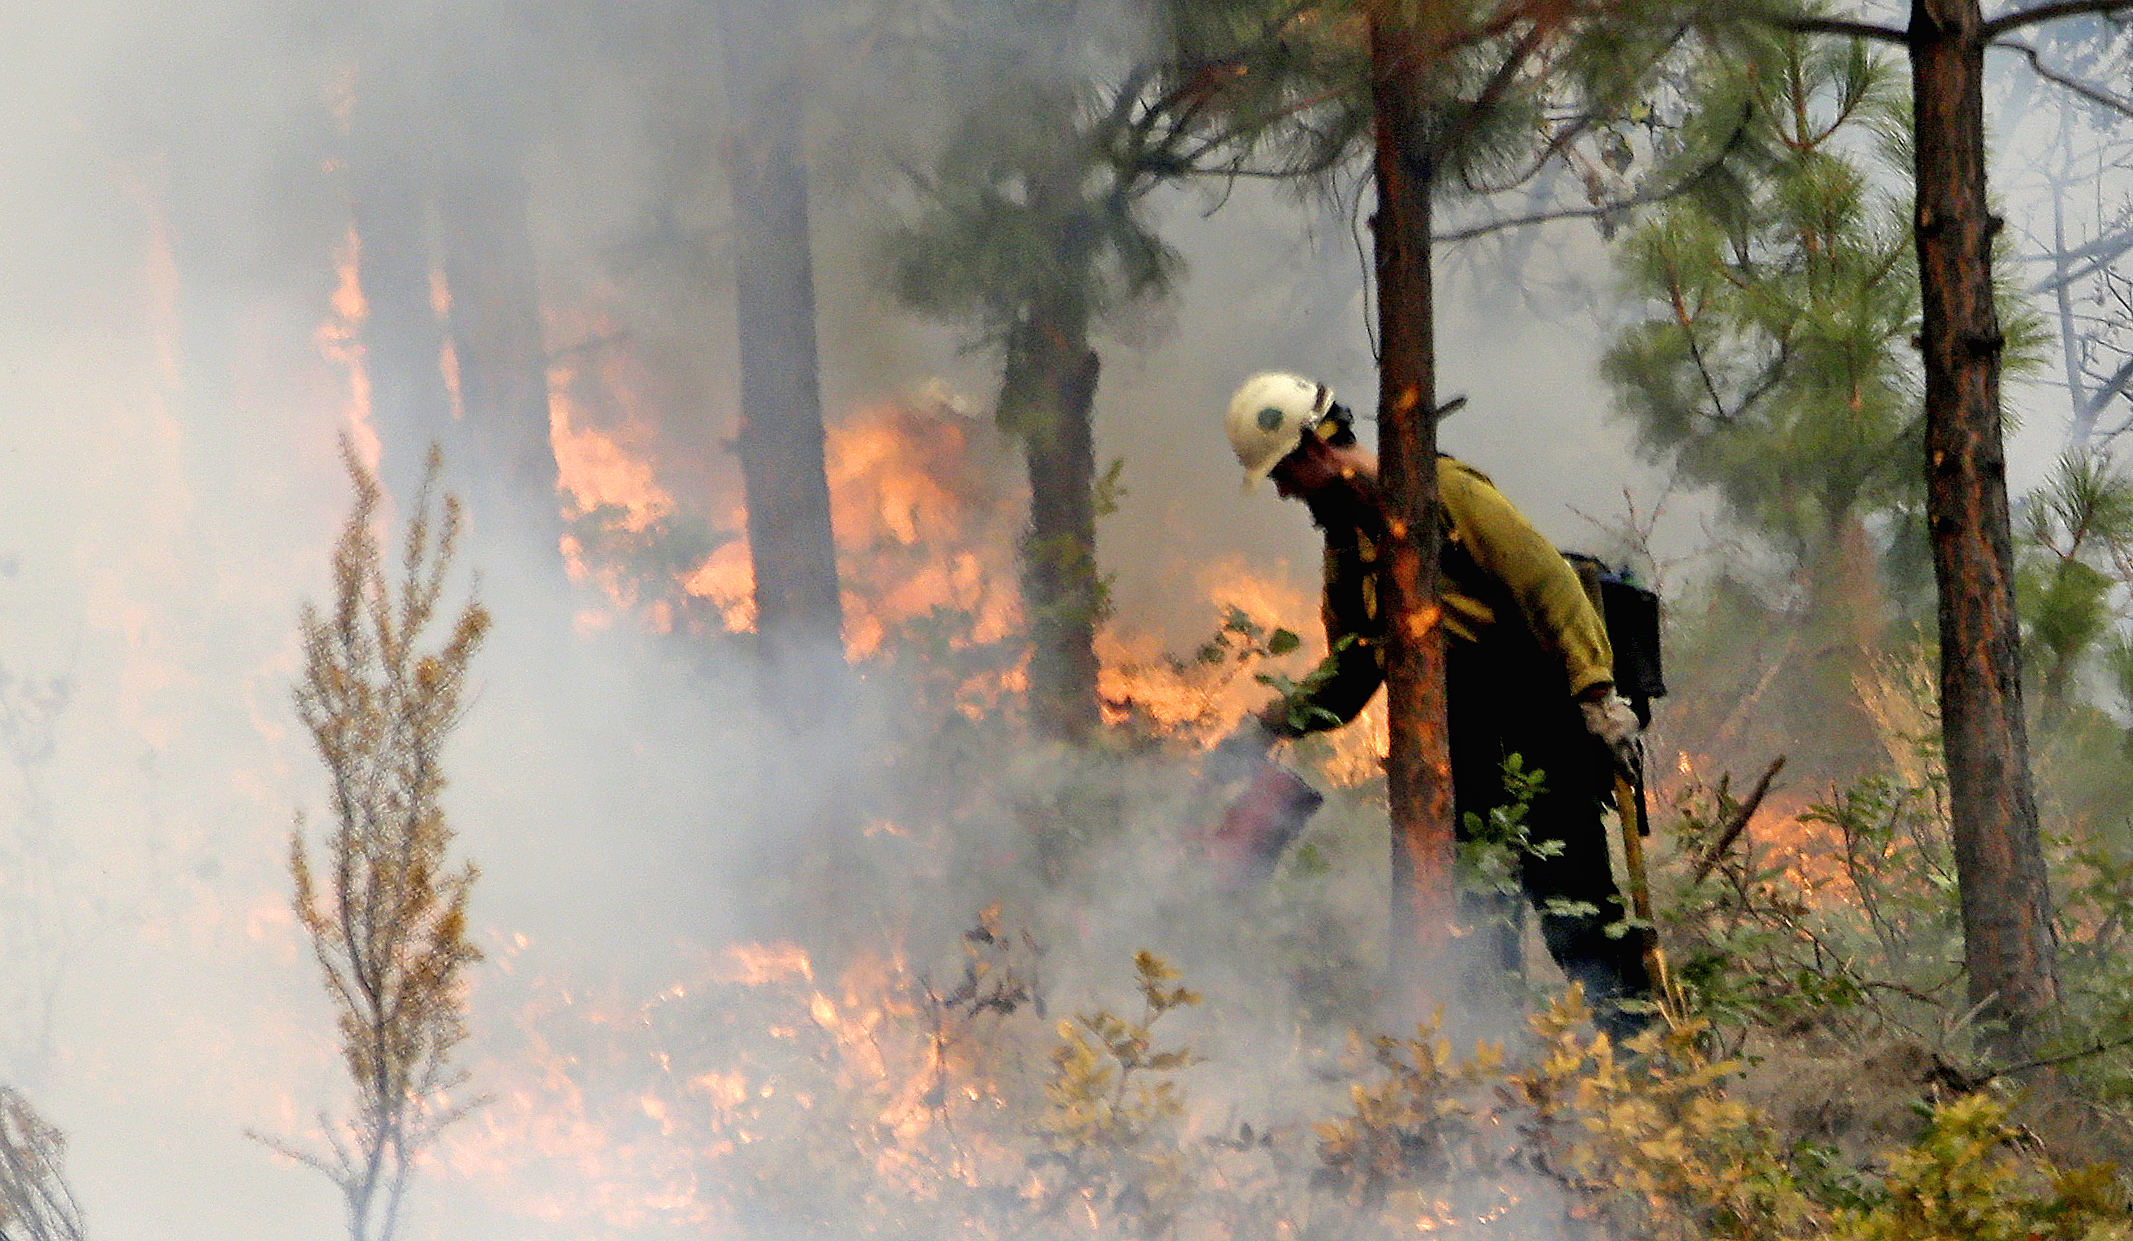 A firefighter with a yellow helmet near trees douses bright orange flames with a red water can.